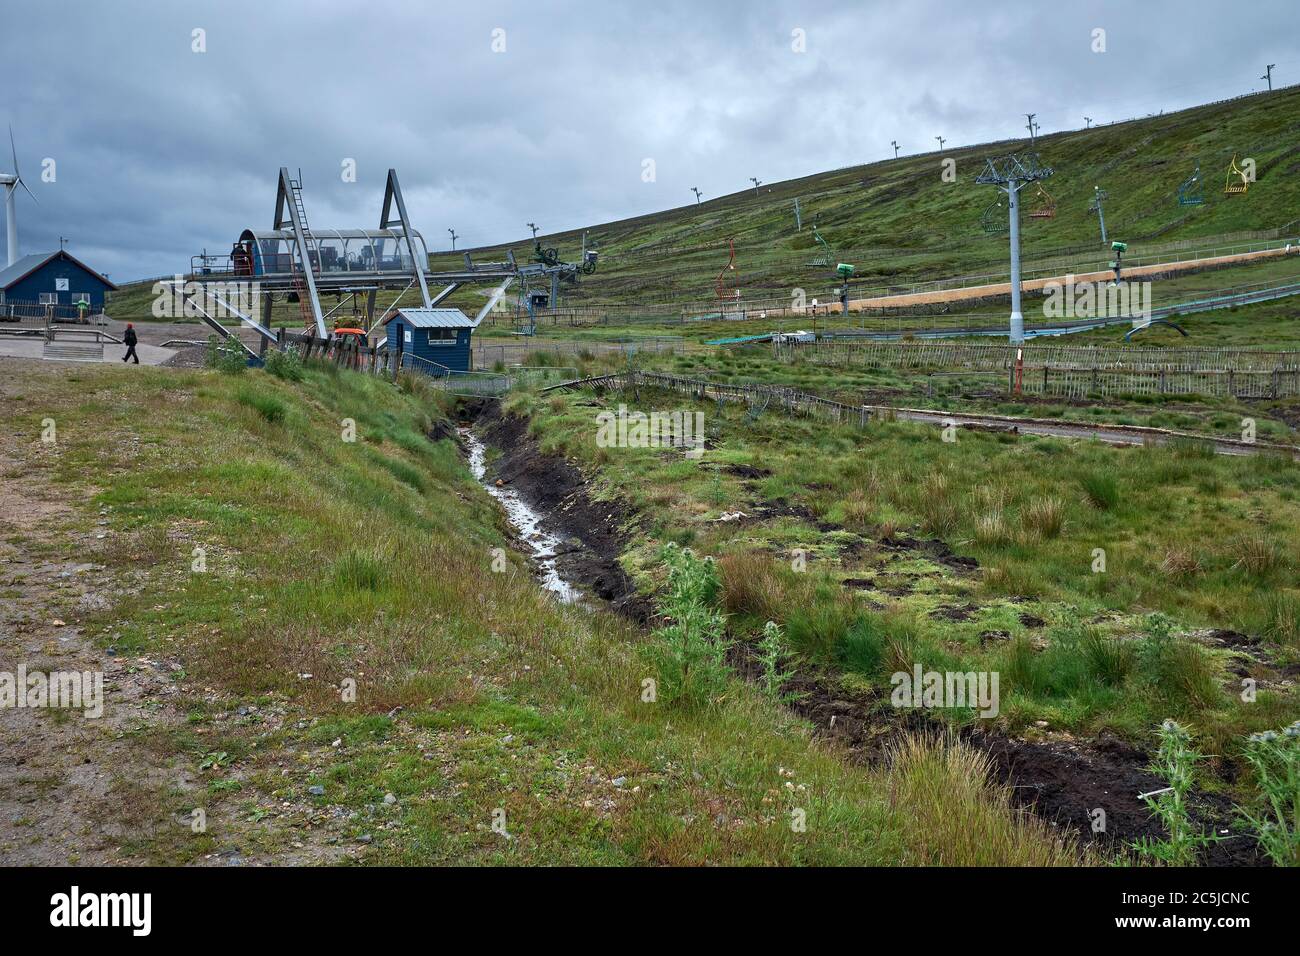 During a rainy July and out of season, the POMA chairlift and gantries stand idle at the Lecht Ski Centre Stock Photo